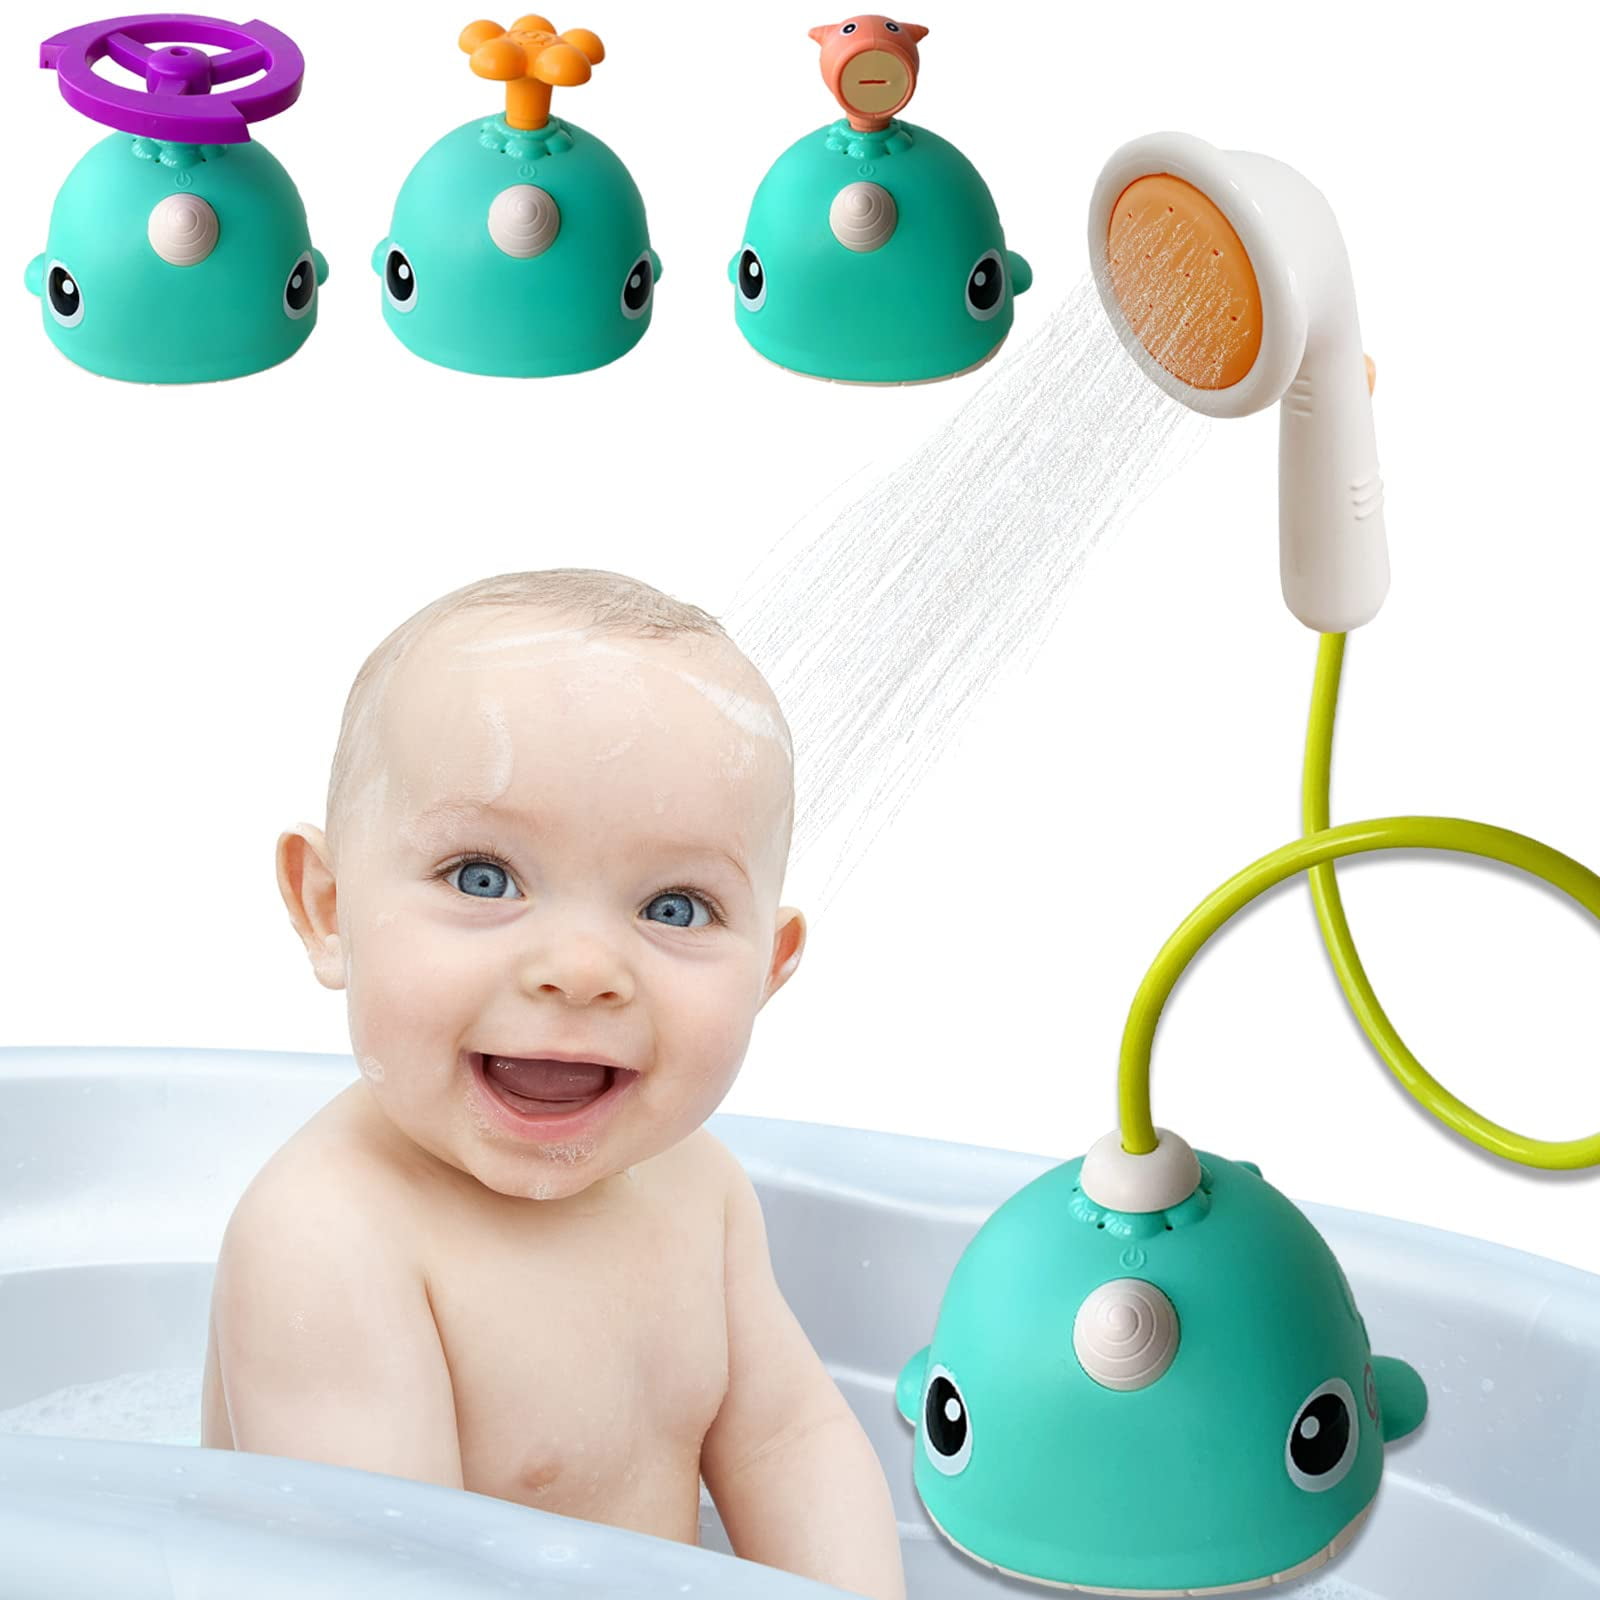 15 Best Bath Toys For Toddlers In 2023, Expert-Reviewed  Best bath toys,  Bath toys for toddlers, Baby bath toys